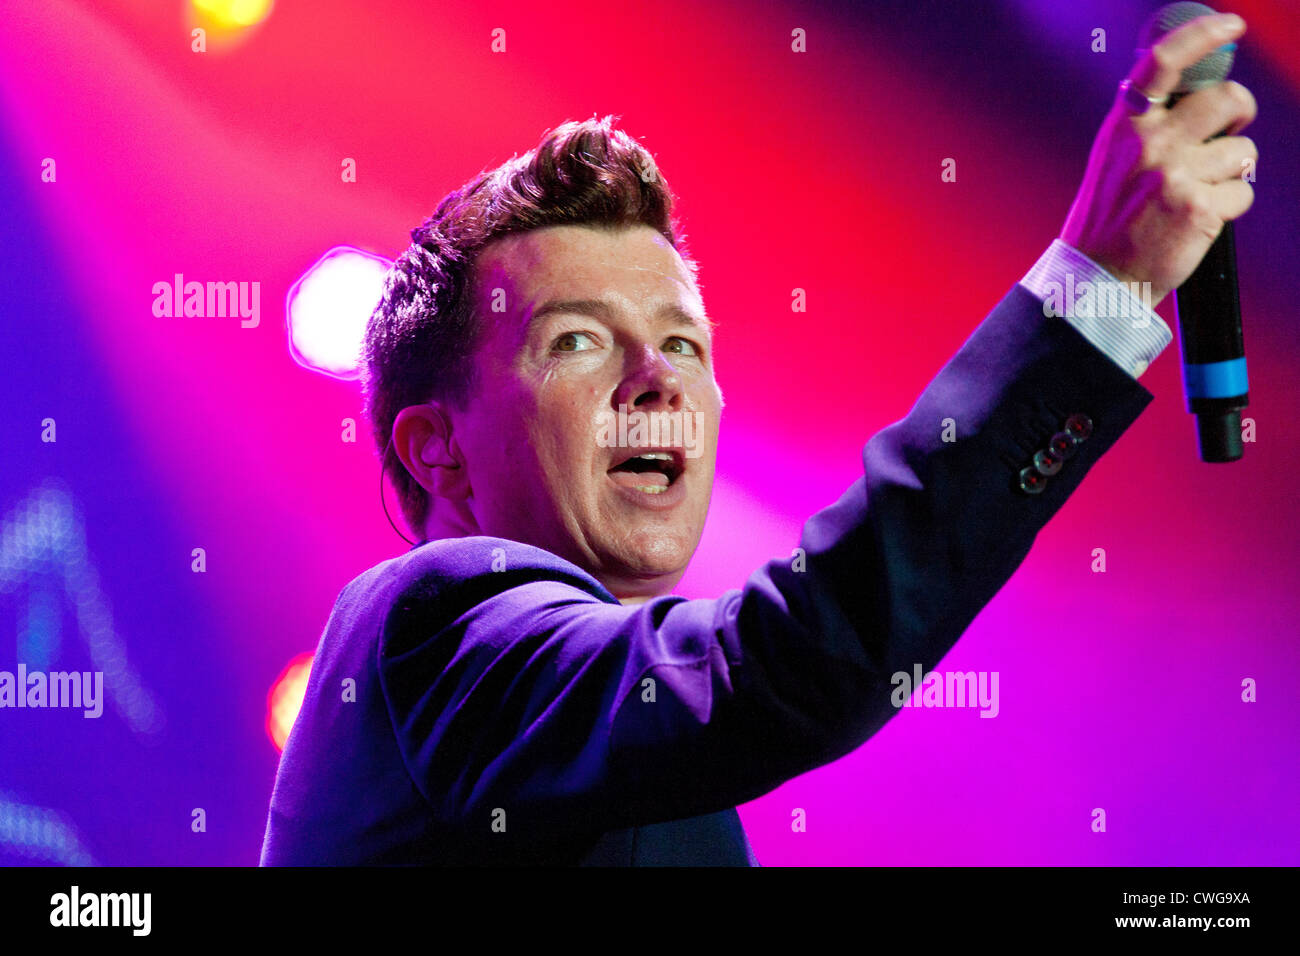 Singer Rick Astley performing on stage at the Rewind Festival Henley on Thames 2012. PER0264 Stock Photo